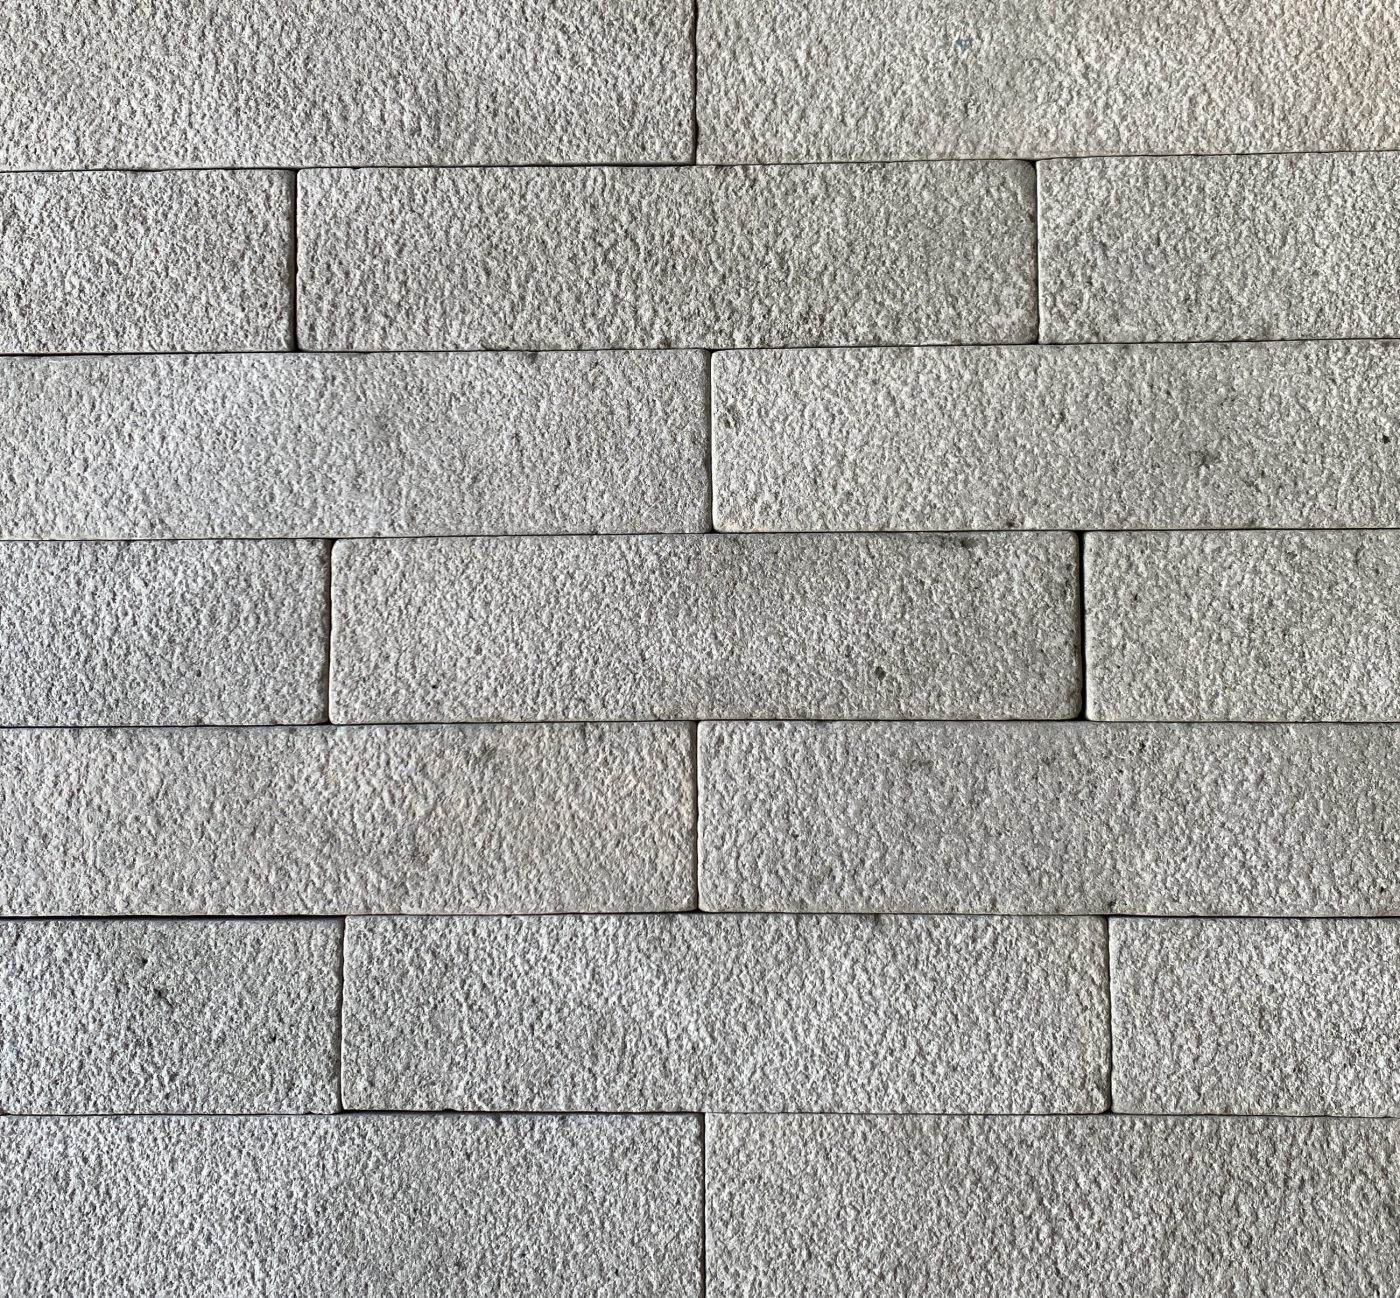 MADDISON-BUSH-HAMMERED-TUMBLED-LIMESTONE-BATON_RMS-TRADERS_NATURAL-STONE-PAVER-SUPPLIER-MELBOURNE-16-scaled